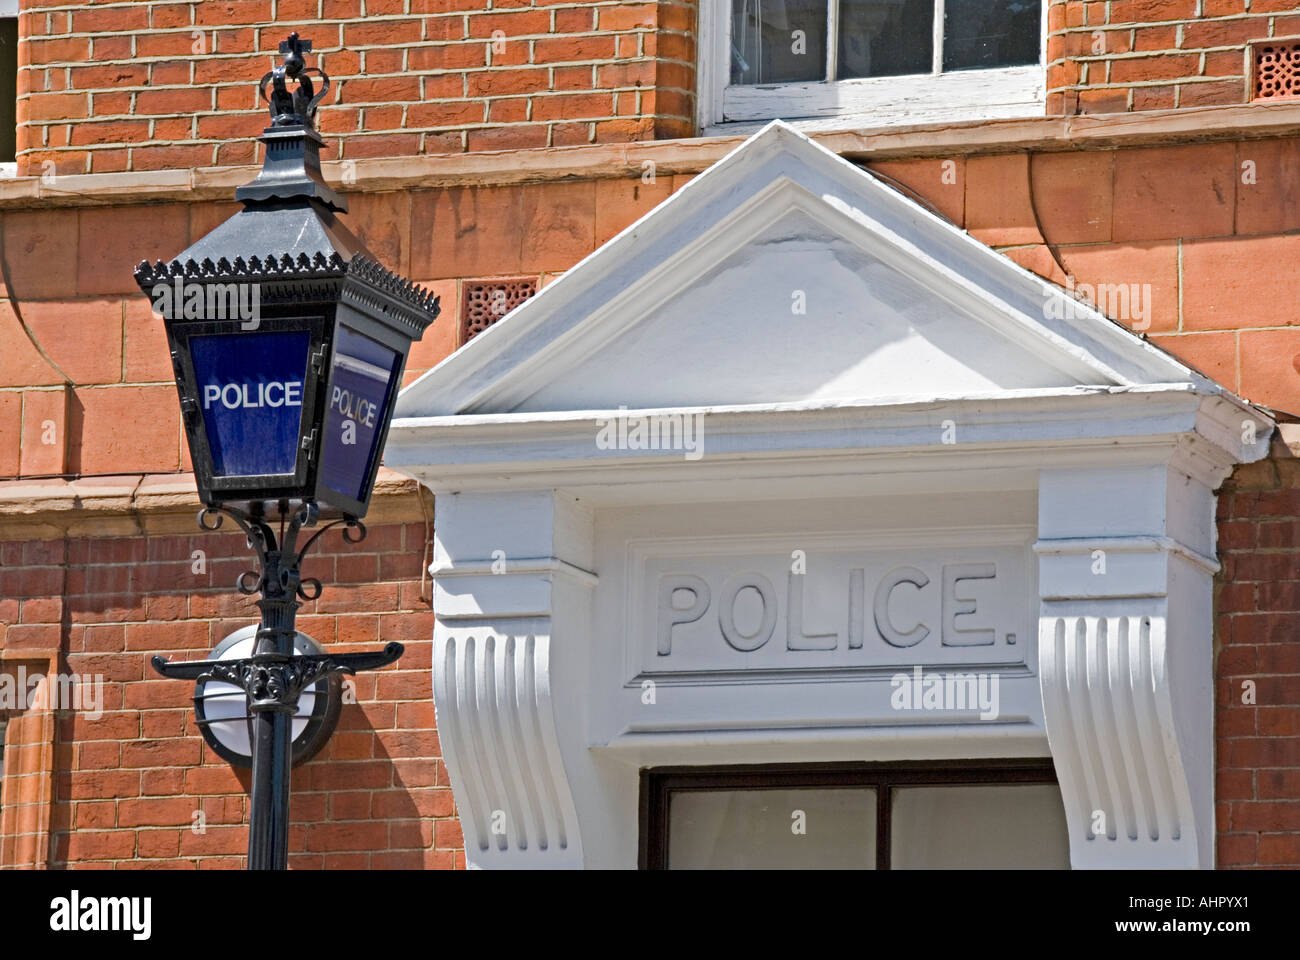 The Metropolitan Police blue lamp outside a city police station Stock Photo